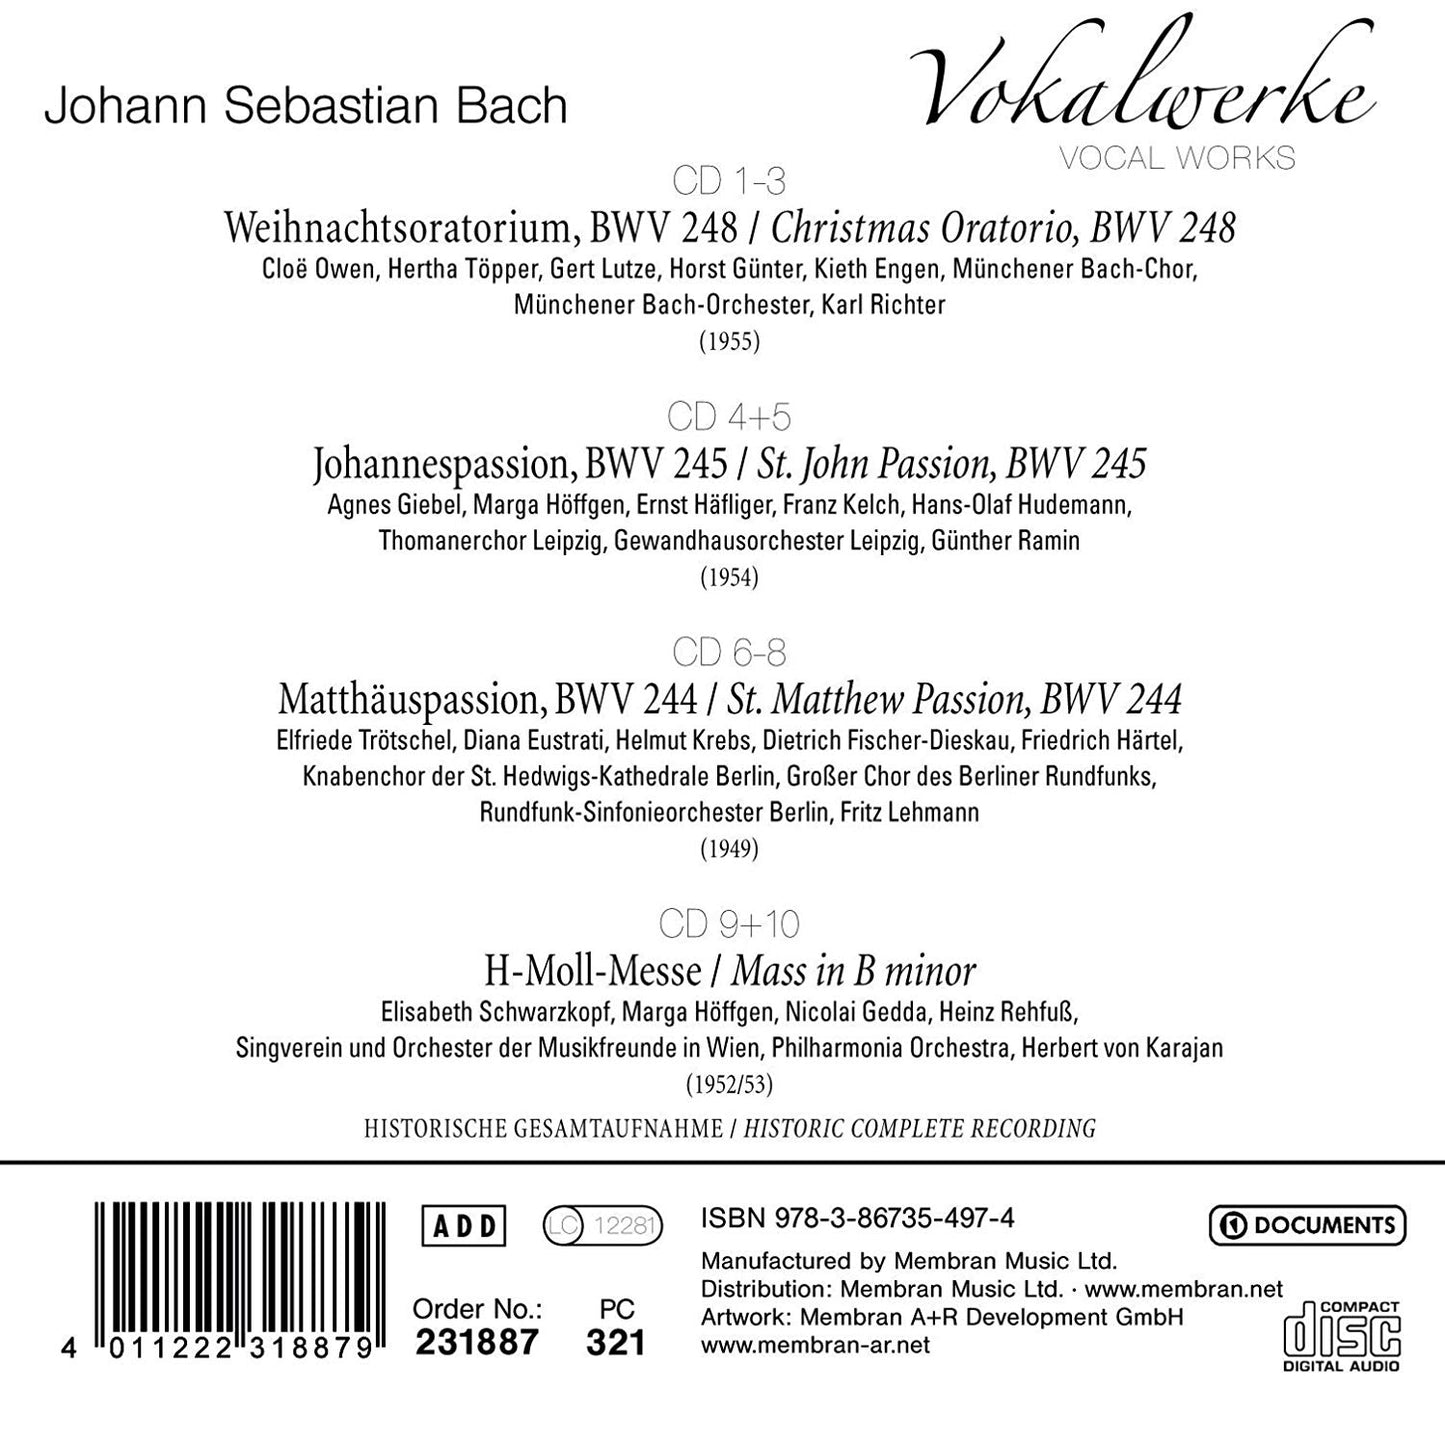 BACH: Vocal Works (10 CD SET INCLUDES FREE BACH CANTATAS DOWNLOAD)